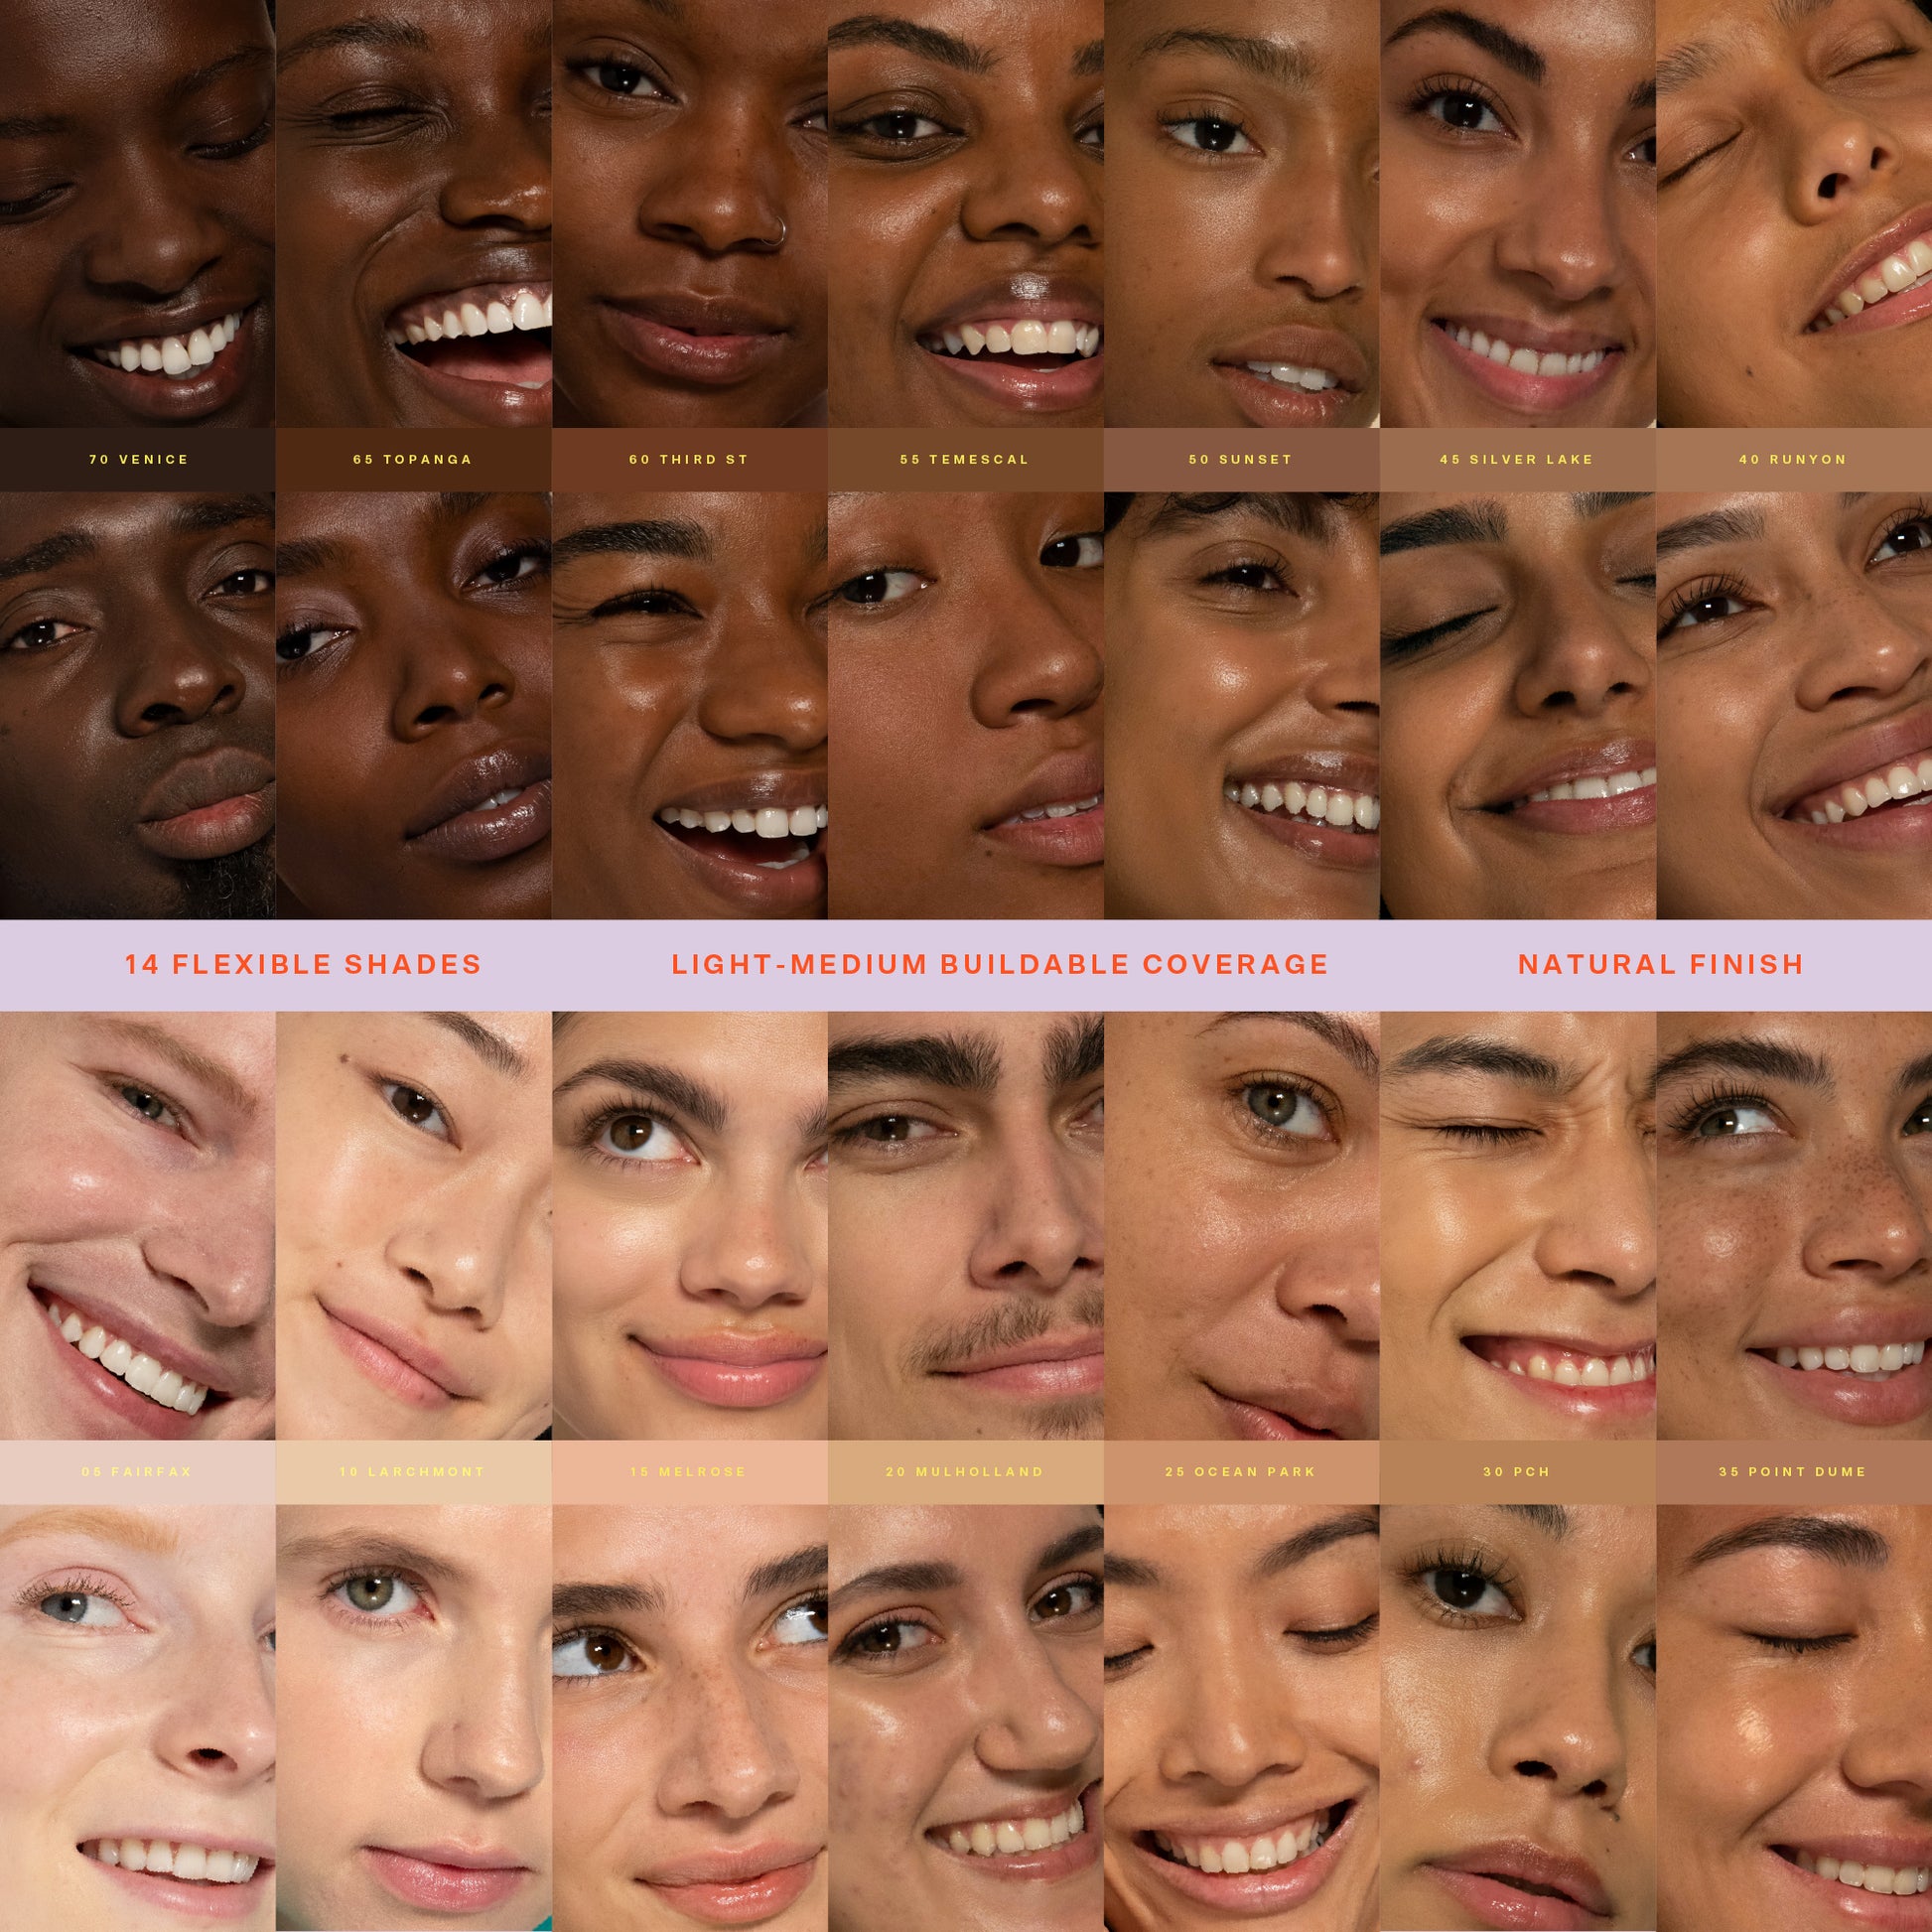 [Shared: All Tower 28 Beauty SunnyDays SPF 30 Tinted Sunscreen on models of different skin tones